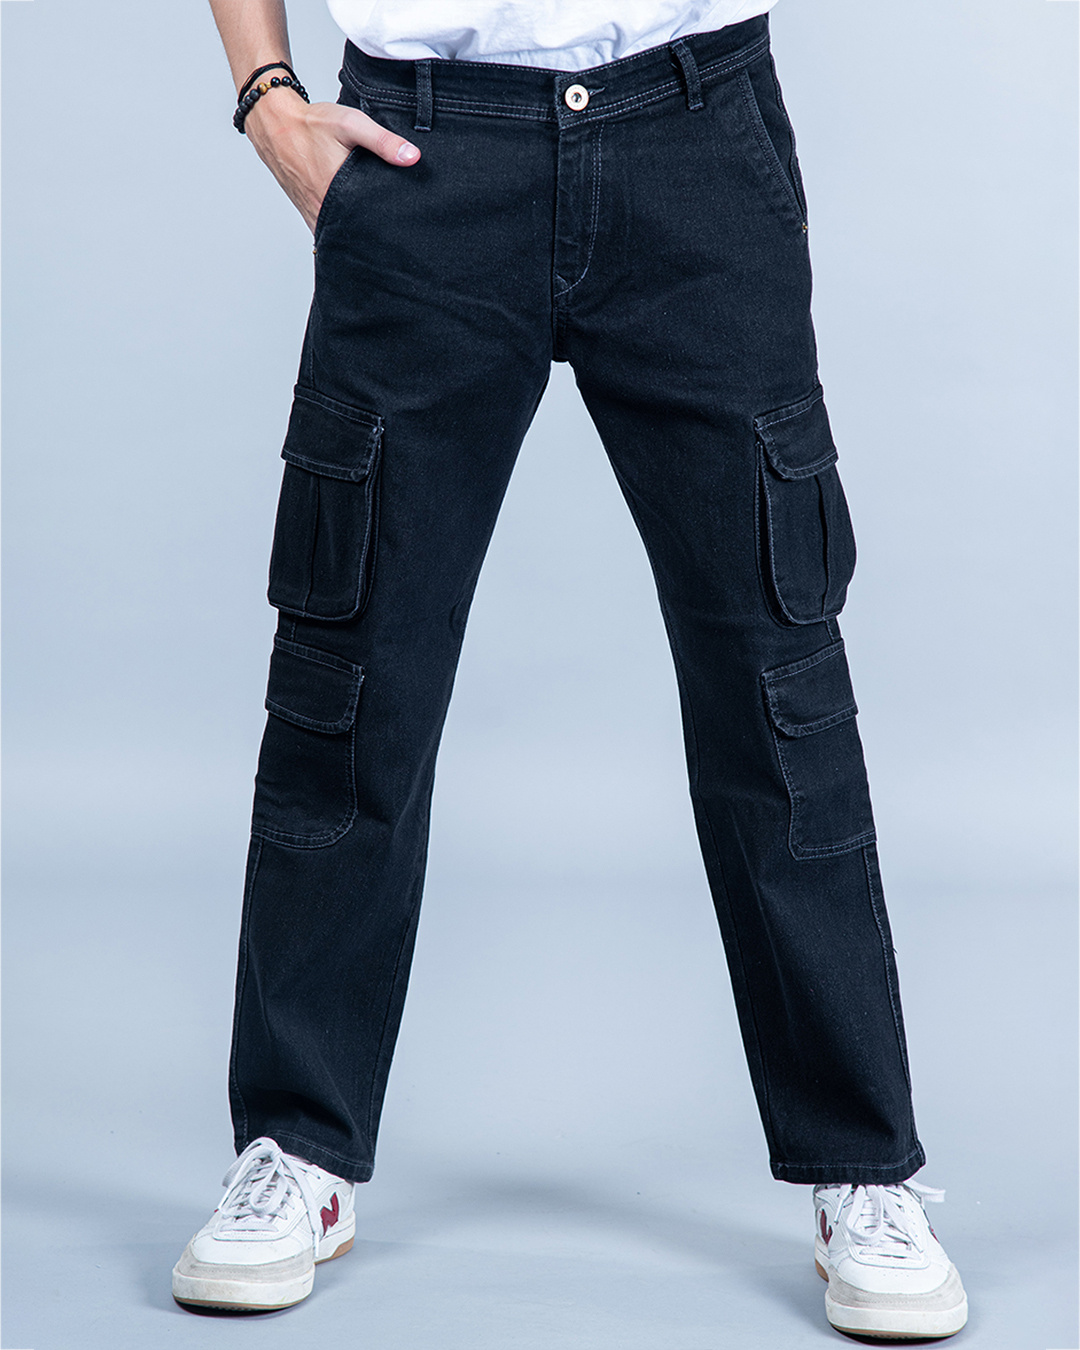 Buy Men's Carbon Black Relaxed Fit Cargo Jeans Online at Bewakoof